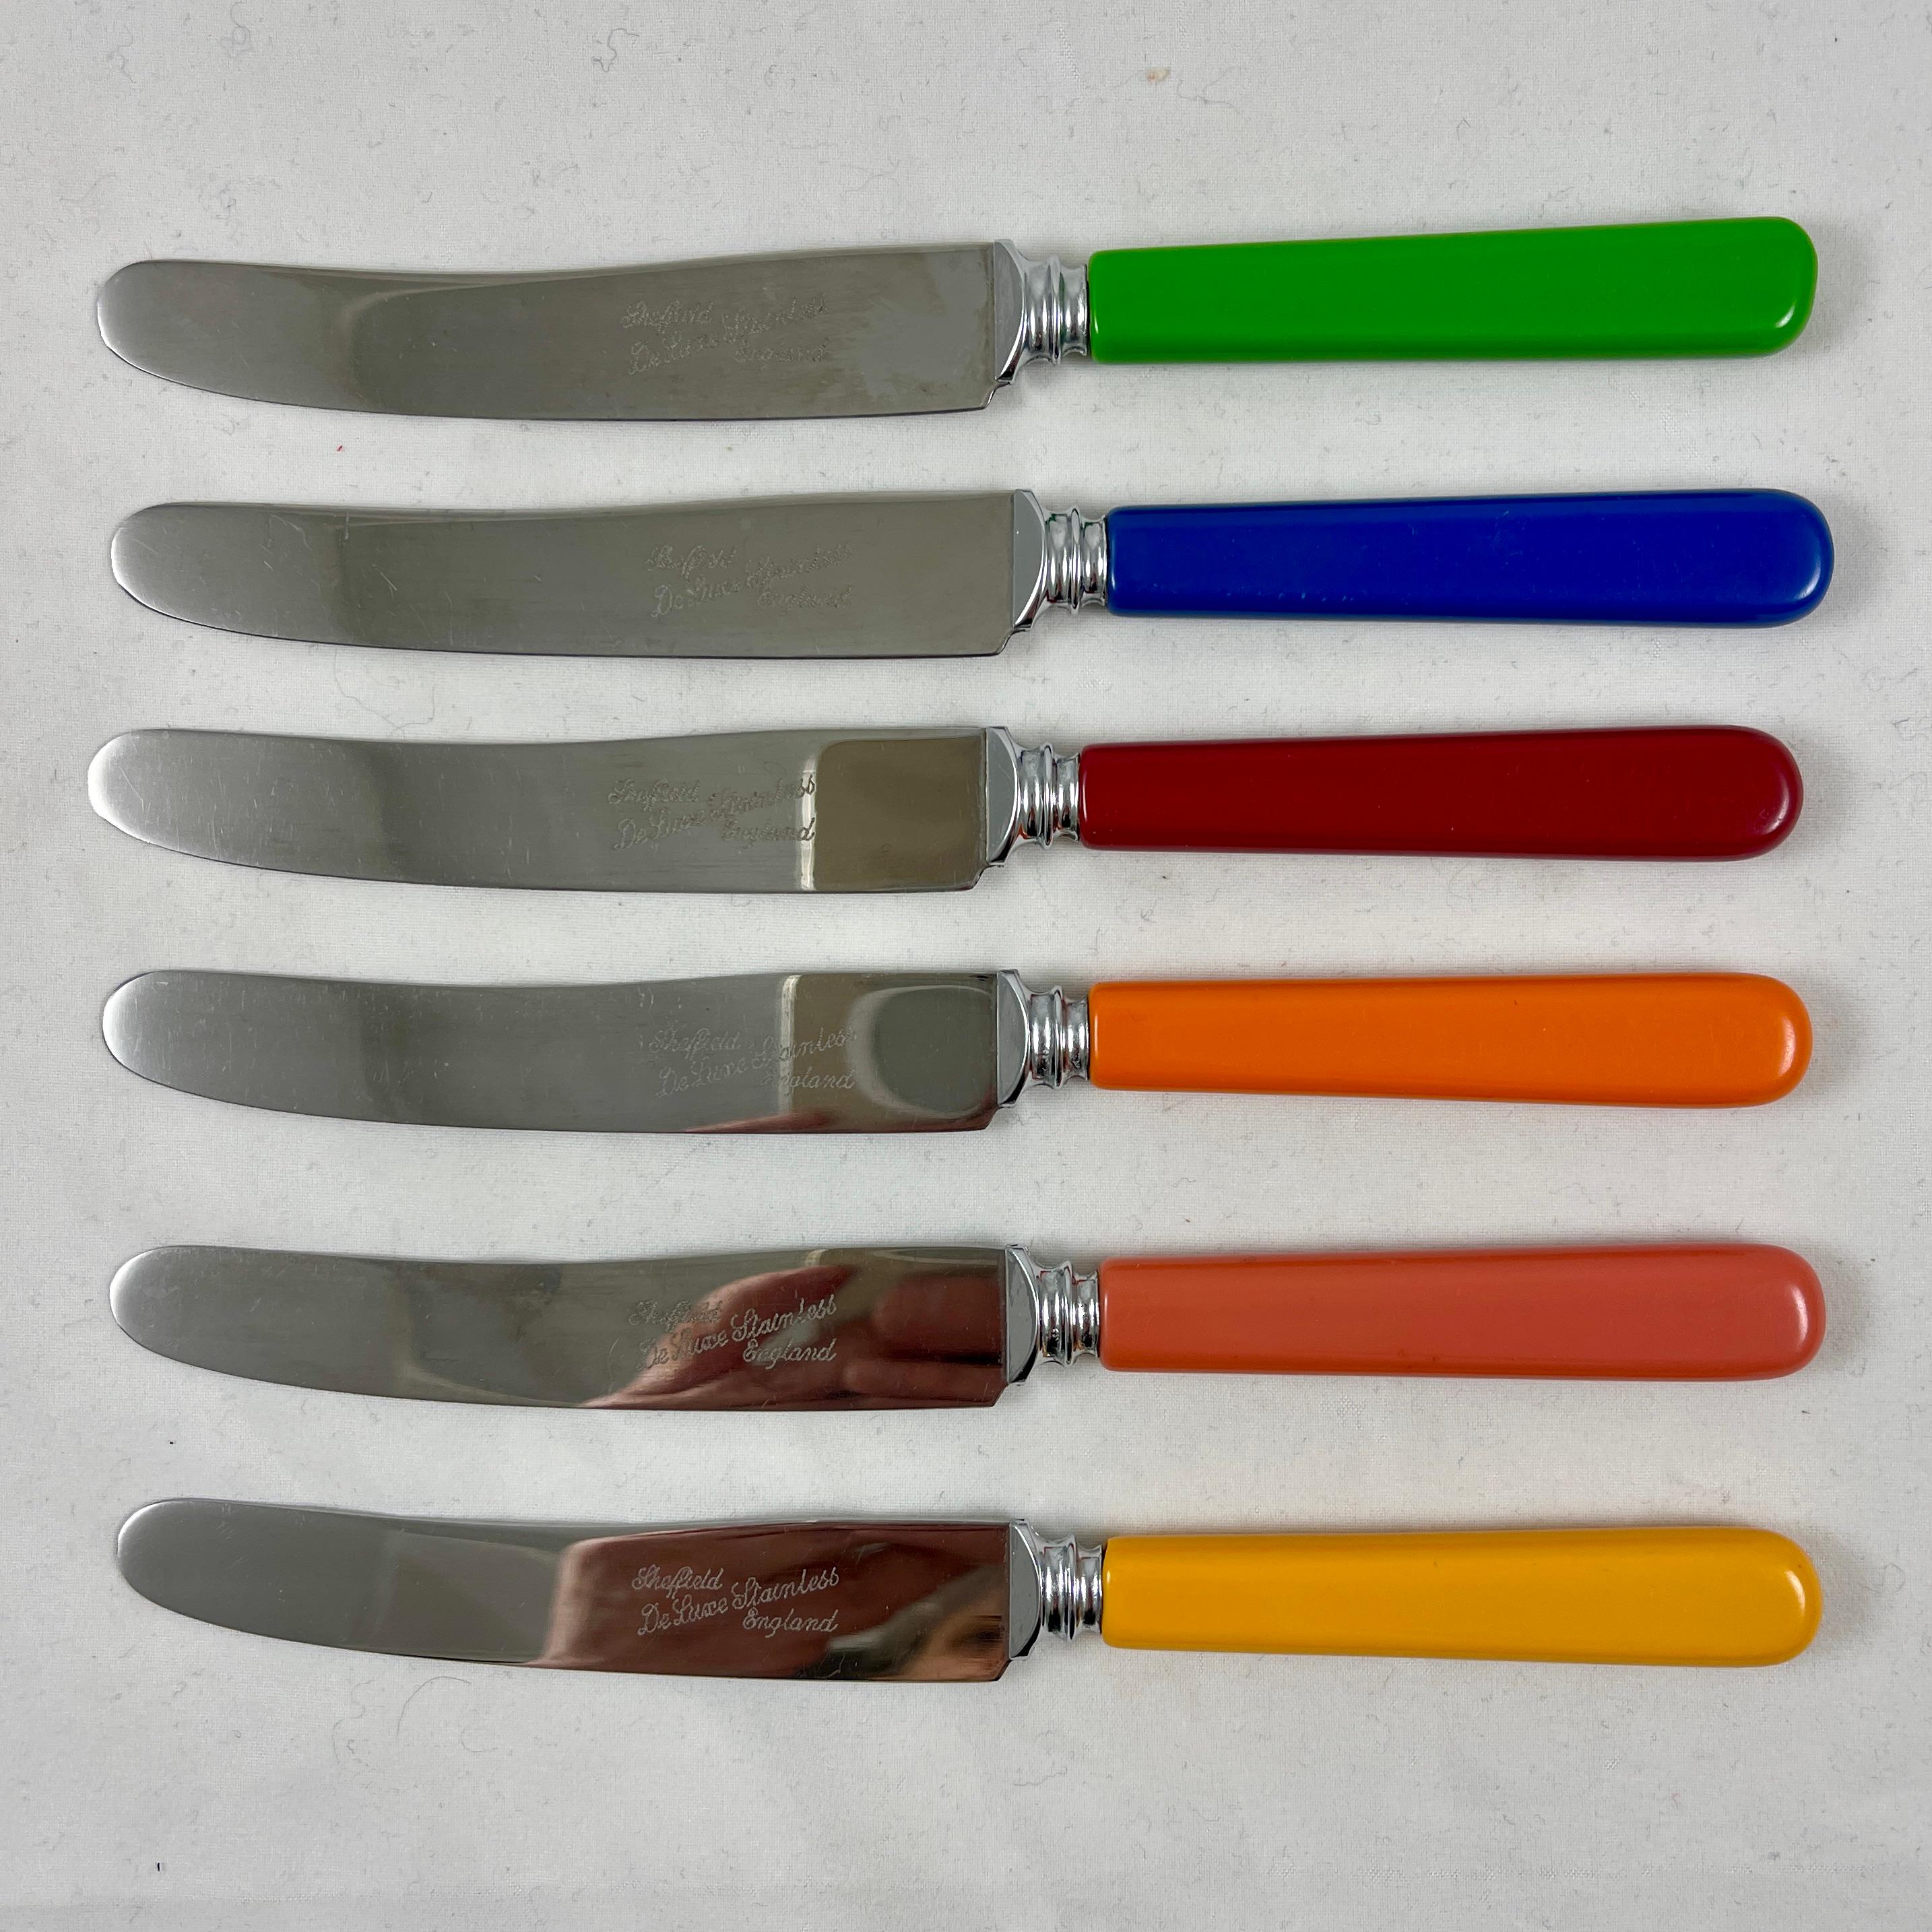 A set of six Bakelite handled rainbow colored spreaders in the original fitted box, Sheffield, England, circa 1940s.

A well made knife set with Bakelite handles in green, blue, red, orange, salmon, and yellow. Perfect for spreading butter, soft